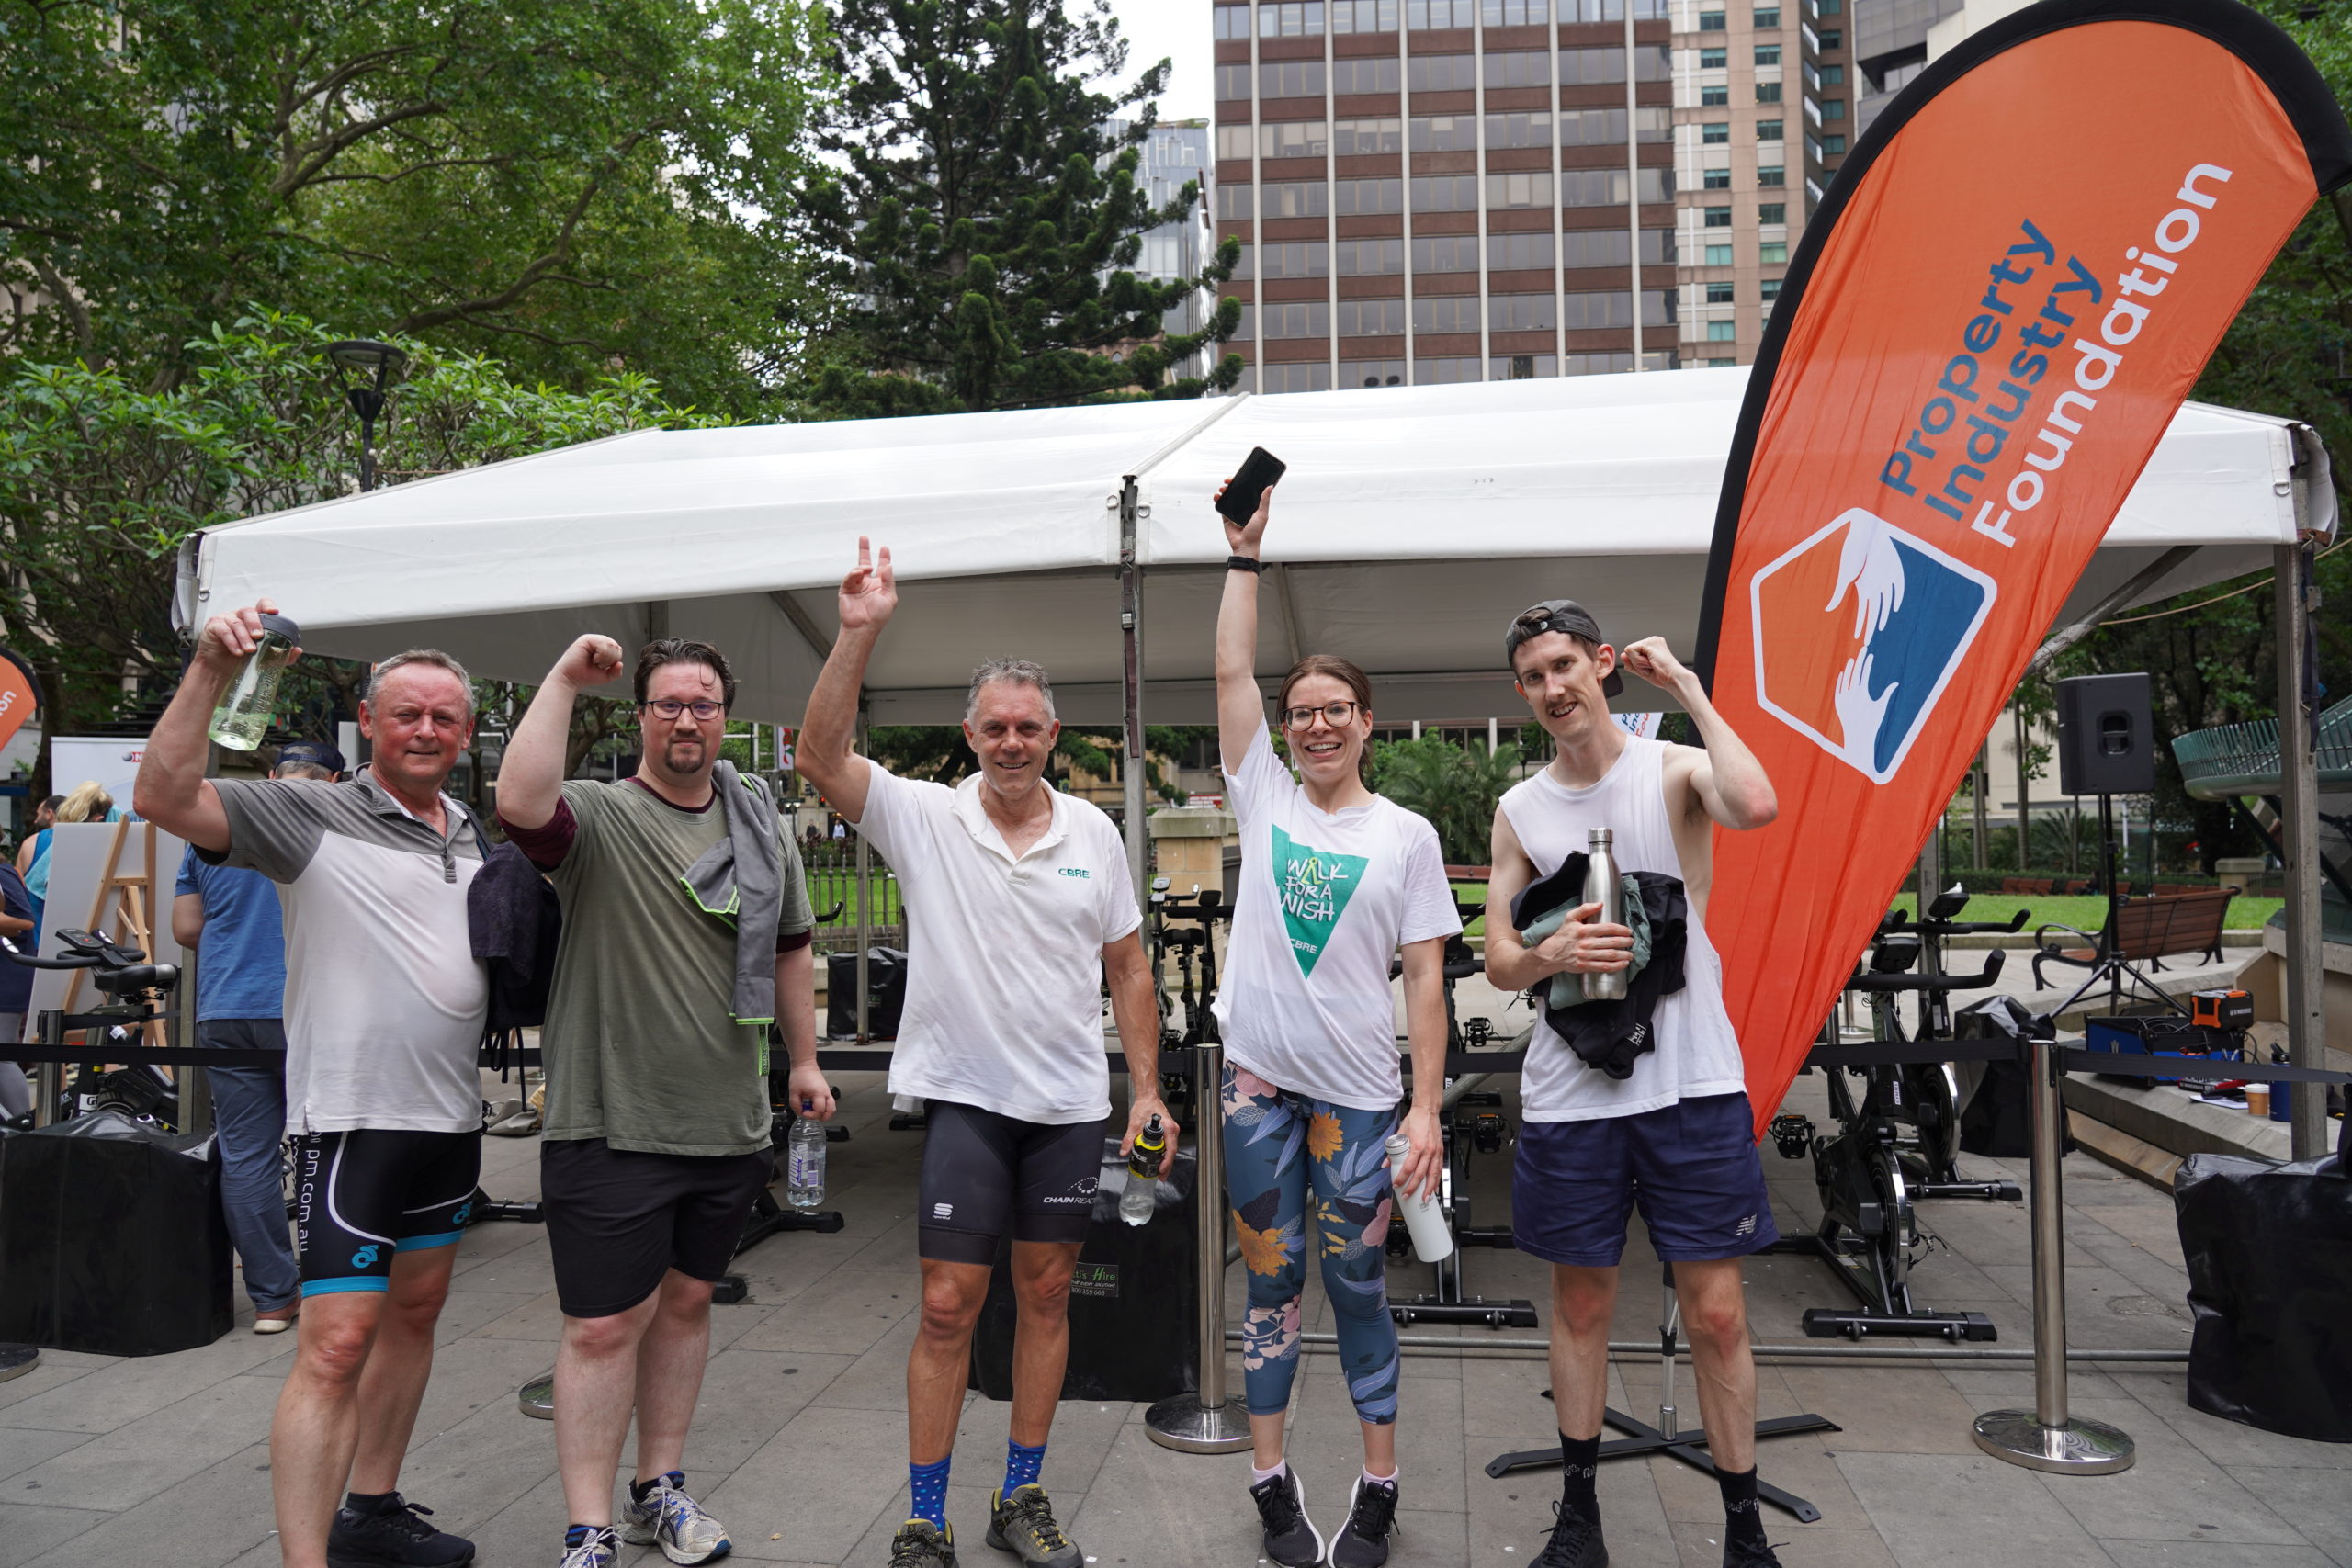 CBRE Sponsors the 30-Day Fitness Challenge